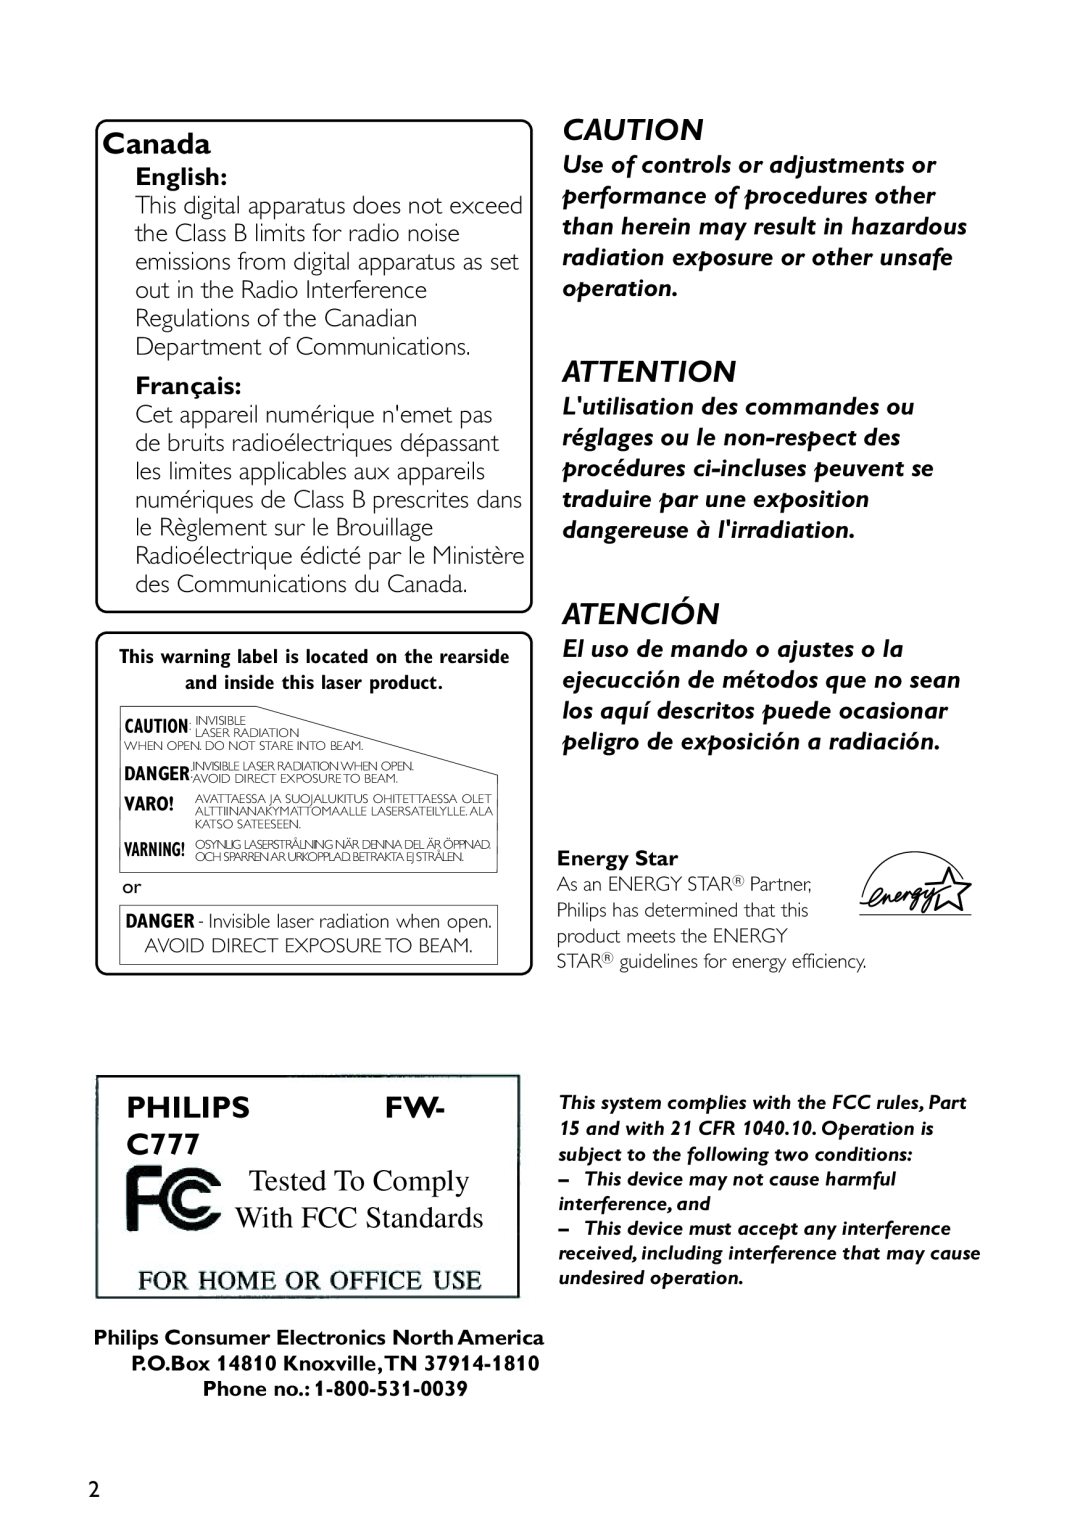 Sony FW-C777 warranty Atención, English, Français, Canada, PHILIPS FW C777, Tested To Comply With FCC Standards 